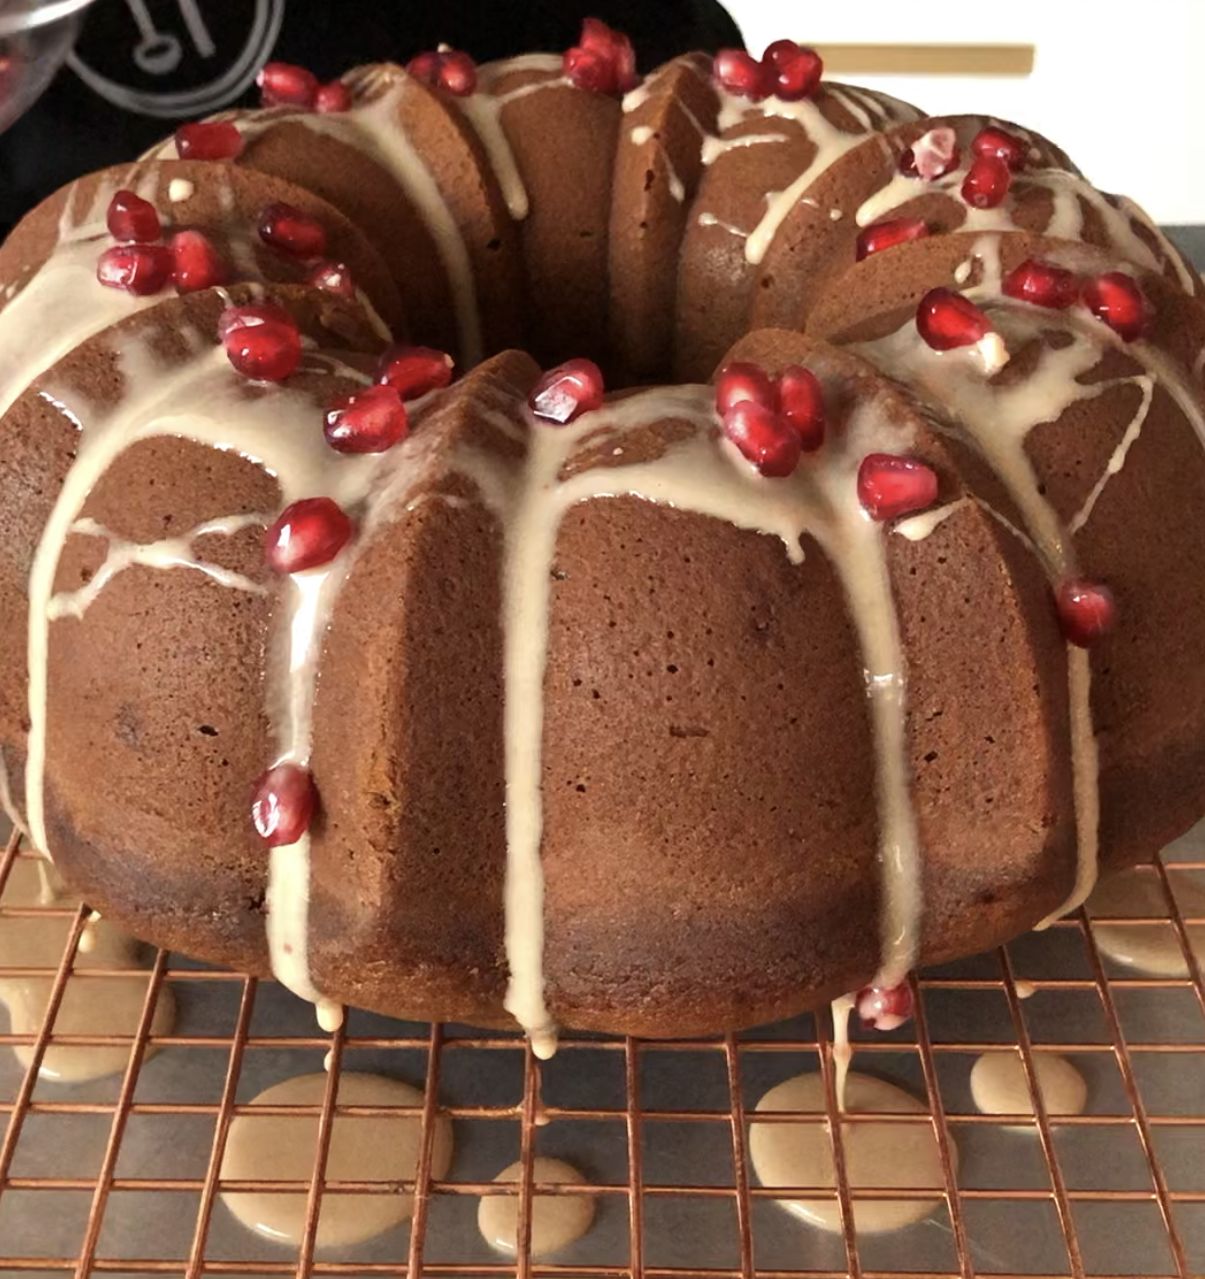 Gingerbread Bundt Cake with Ginger and Cinnamon Glaze